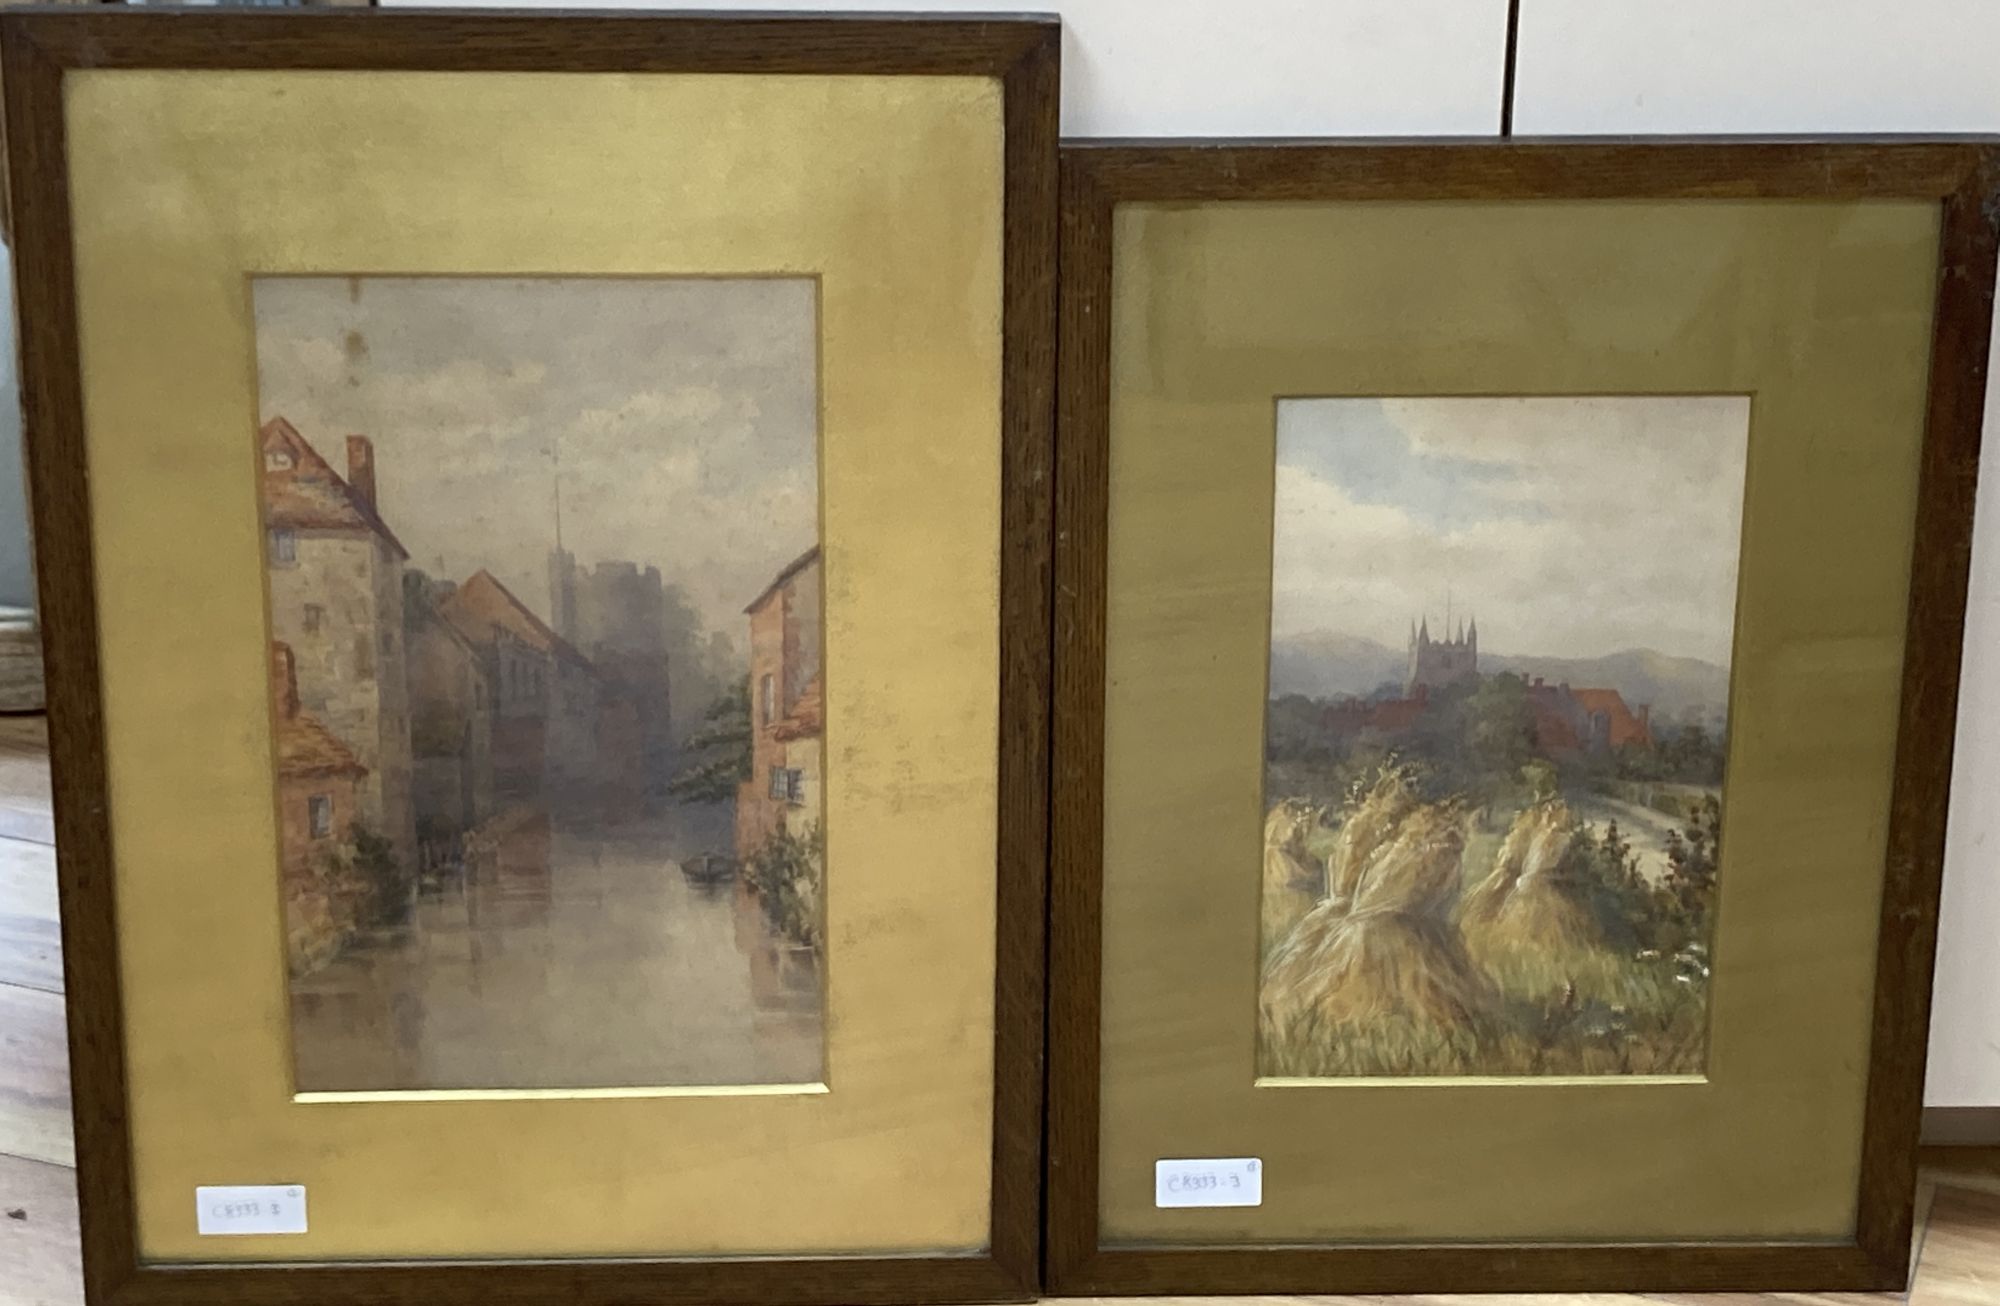 English School c.1900, two watercolours, Westgate Tower, River Stour, Canterbury, and St Leonards Church, Hythe, Kent, 40 x 25cm and